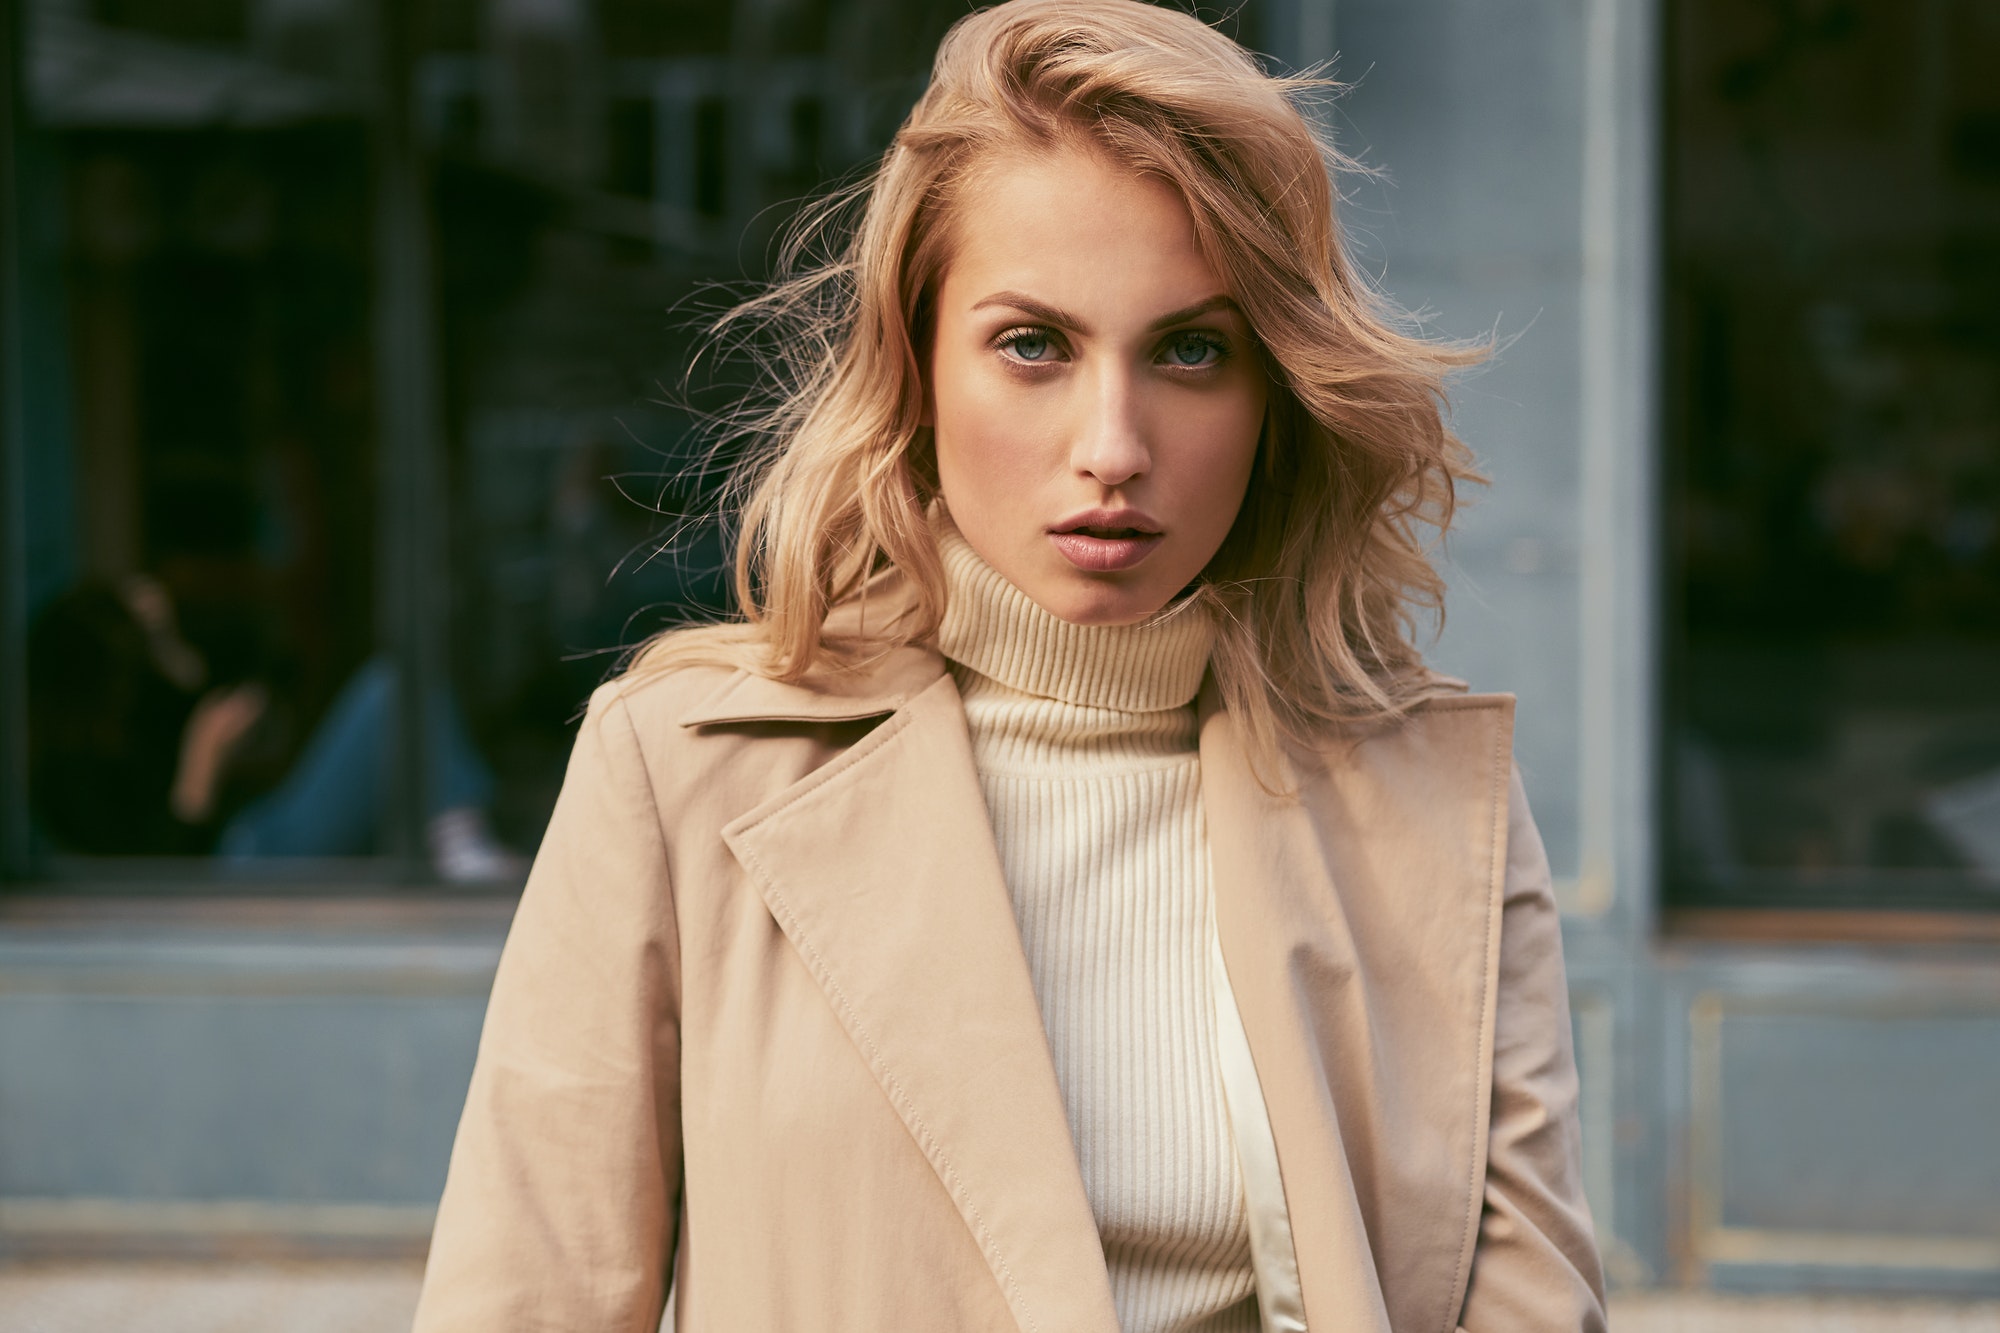 Beautiful serious blond girl in trench coat confidently looking in camera on street